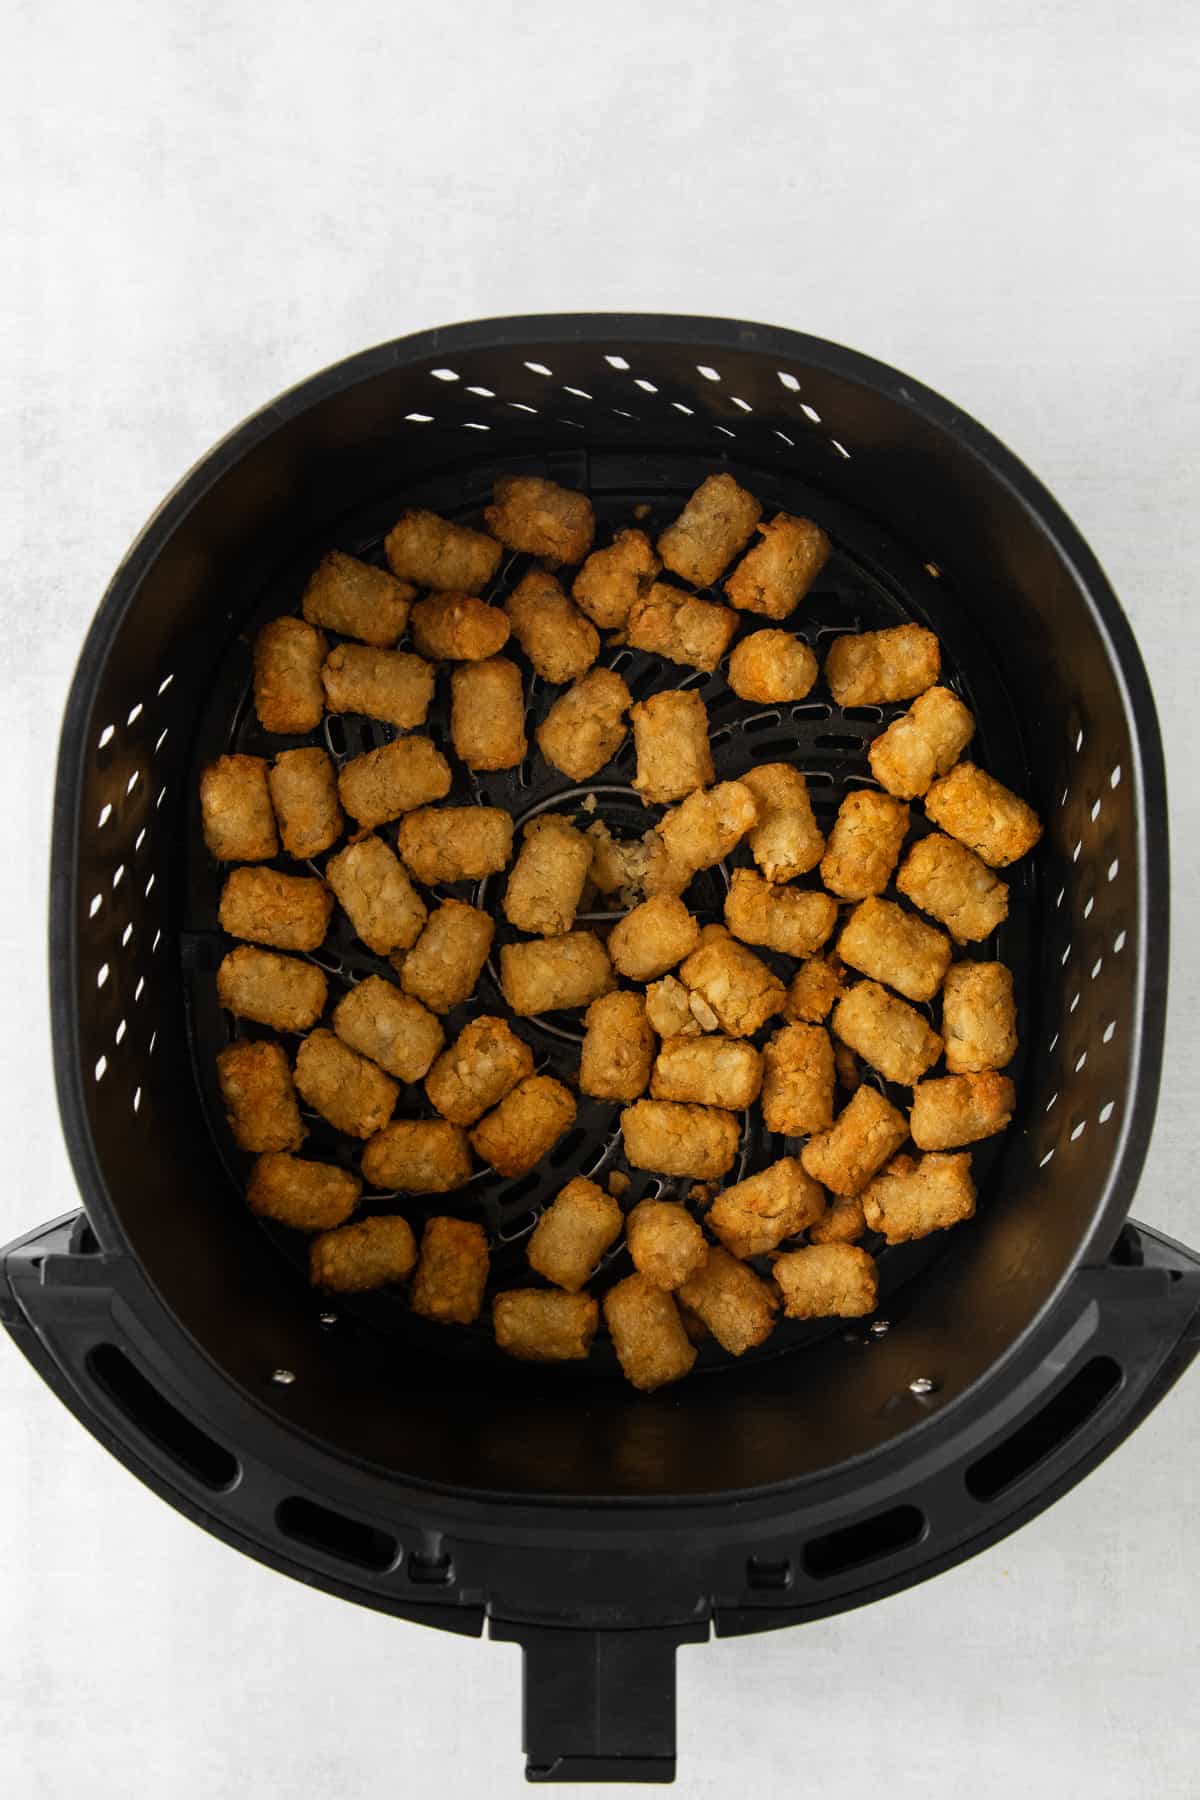 Tater tots in an air fryer.